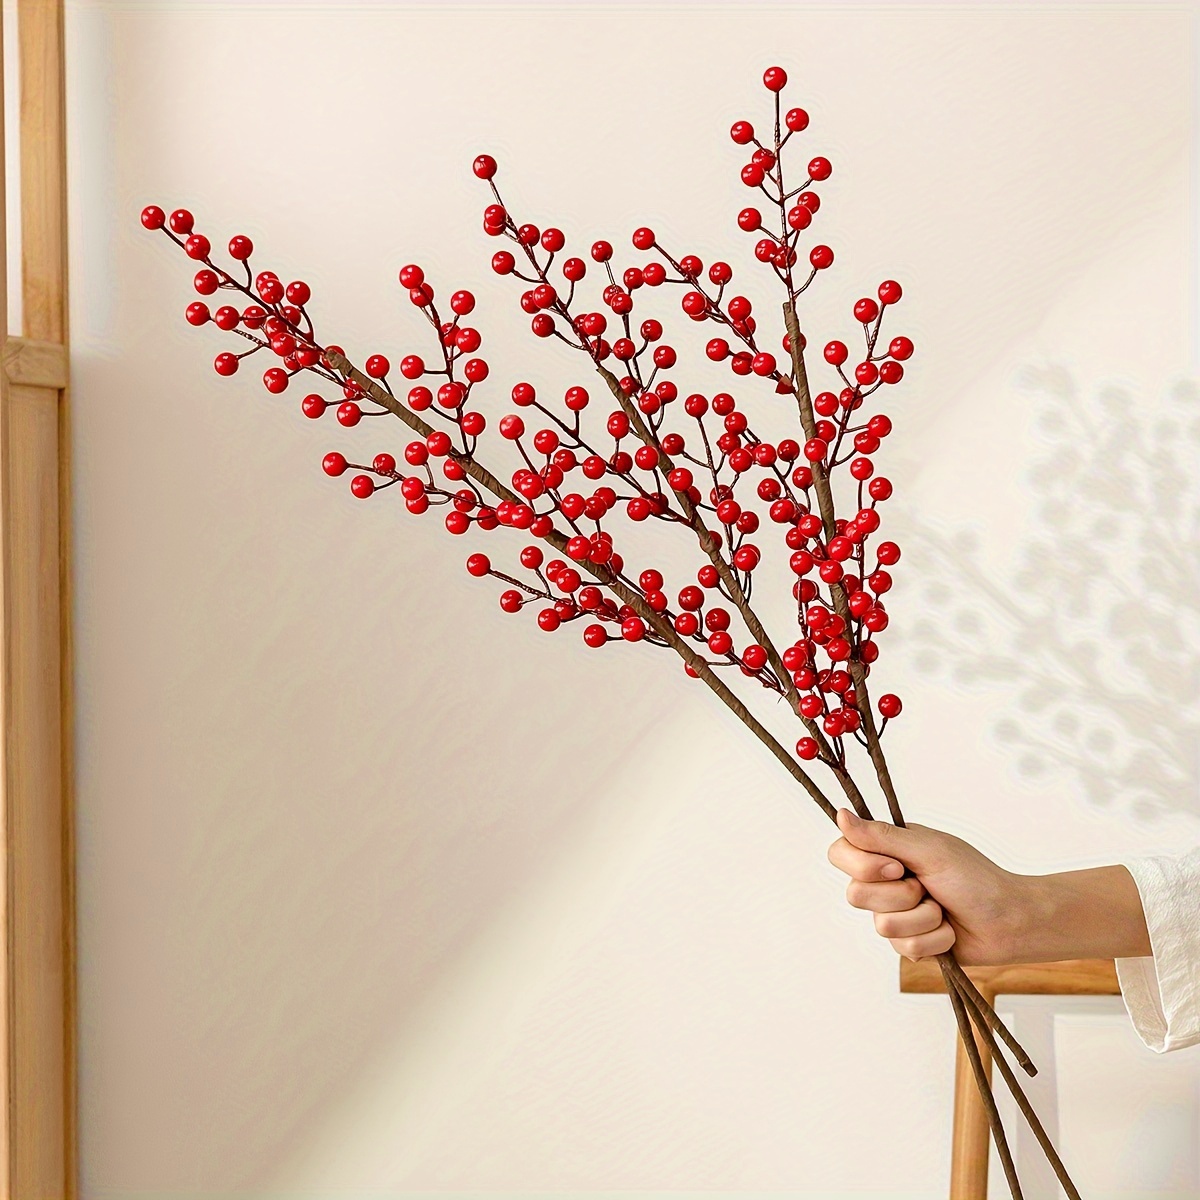 3pcs, Winter Berry Long Stems Artificial Berry Simulation Beans Picks  Lifelike Berries Bouquet Christmas New Year Spring Festival Home Decoration  For